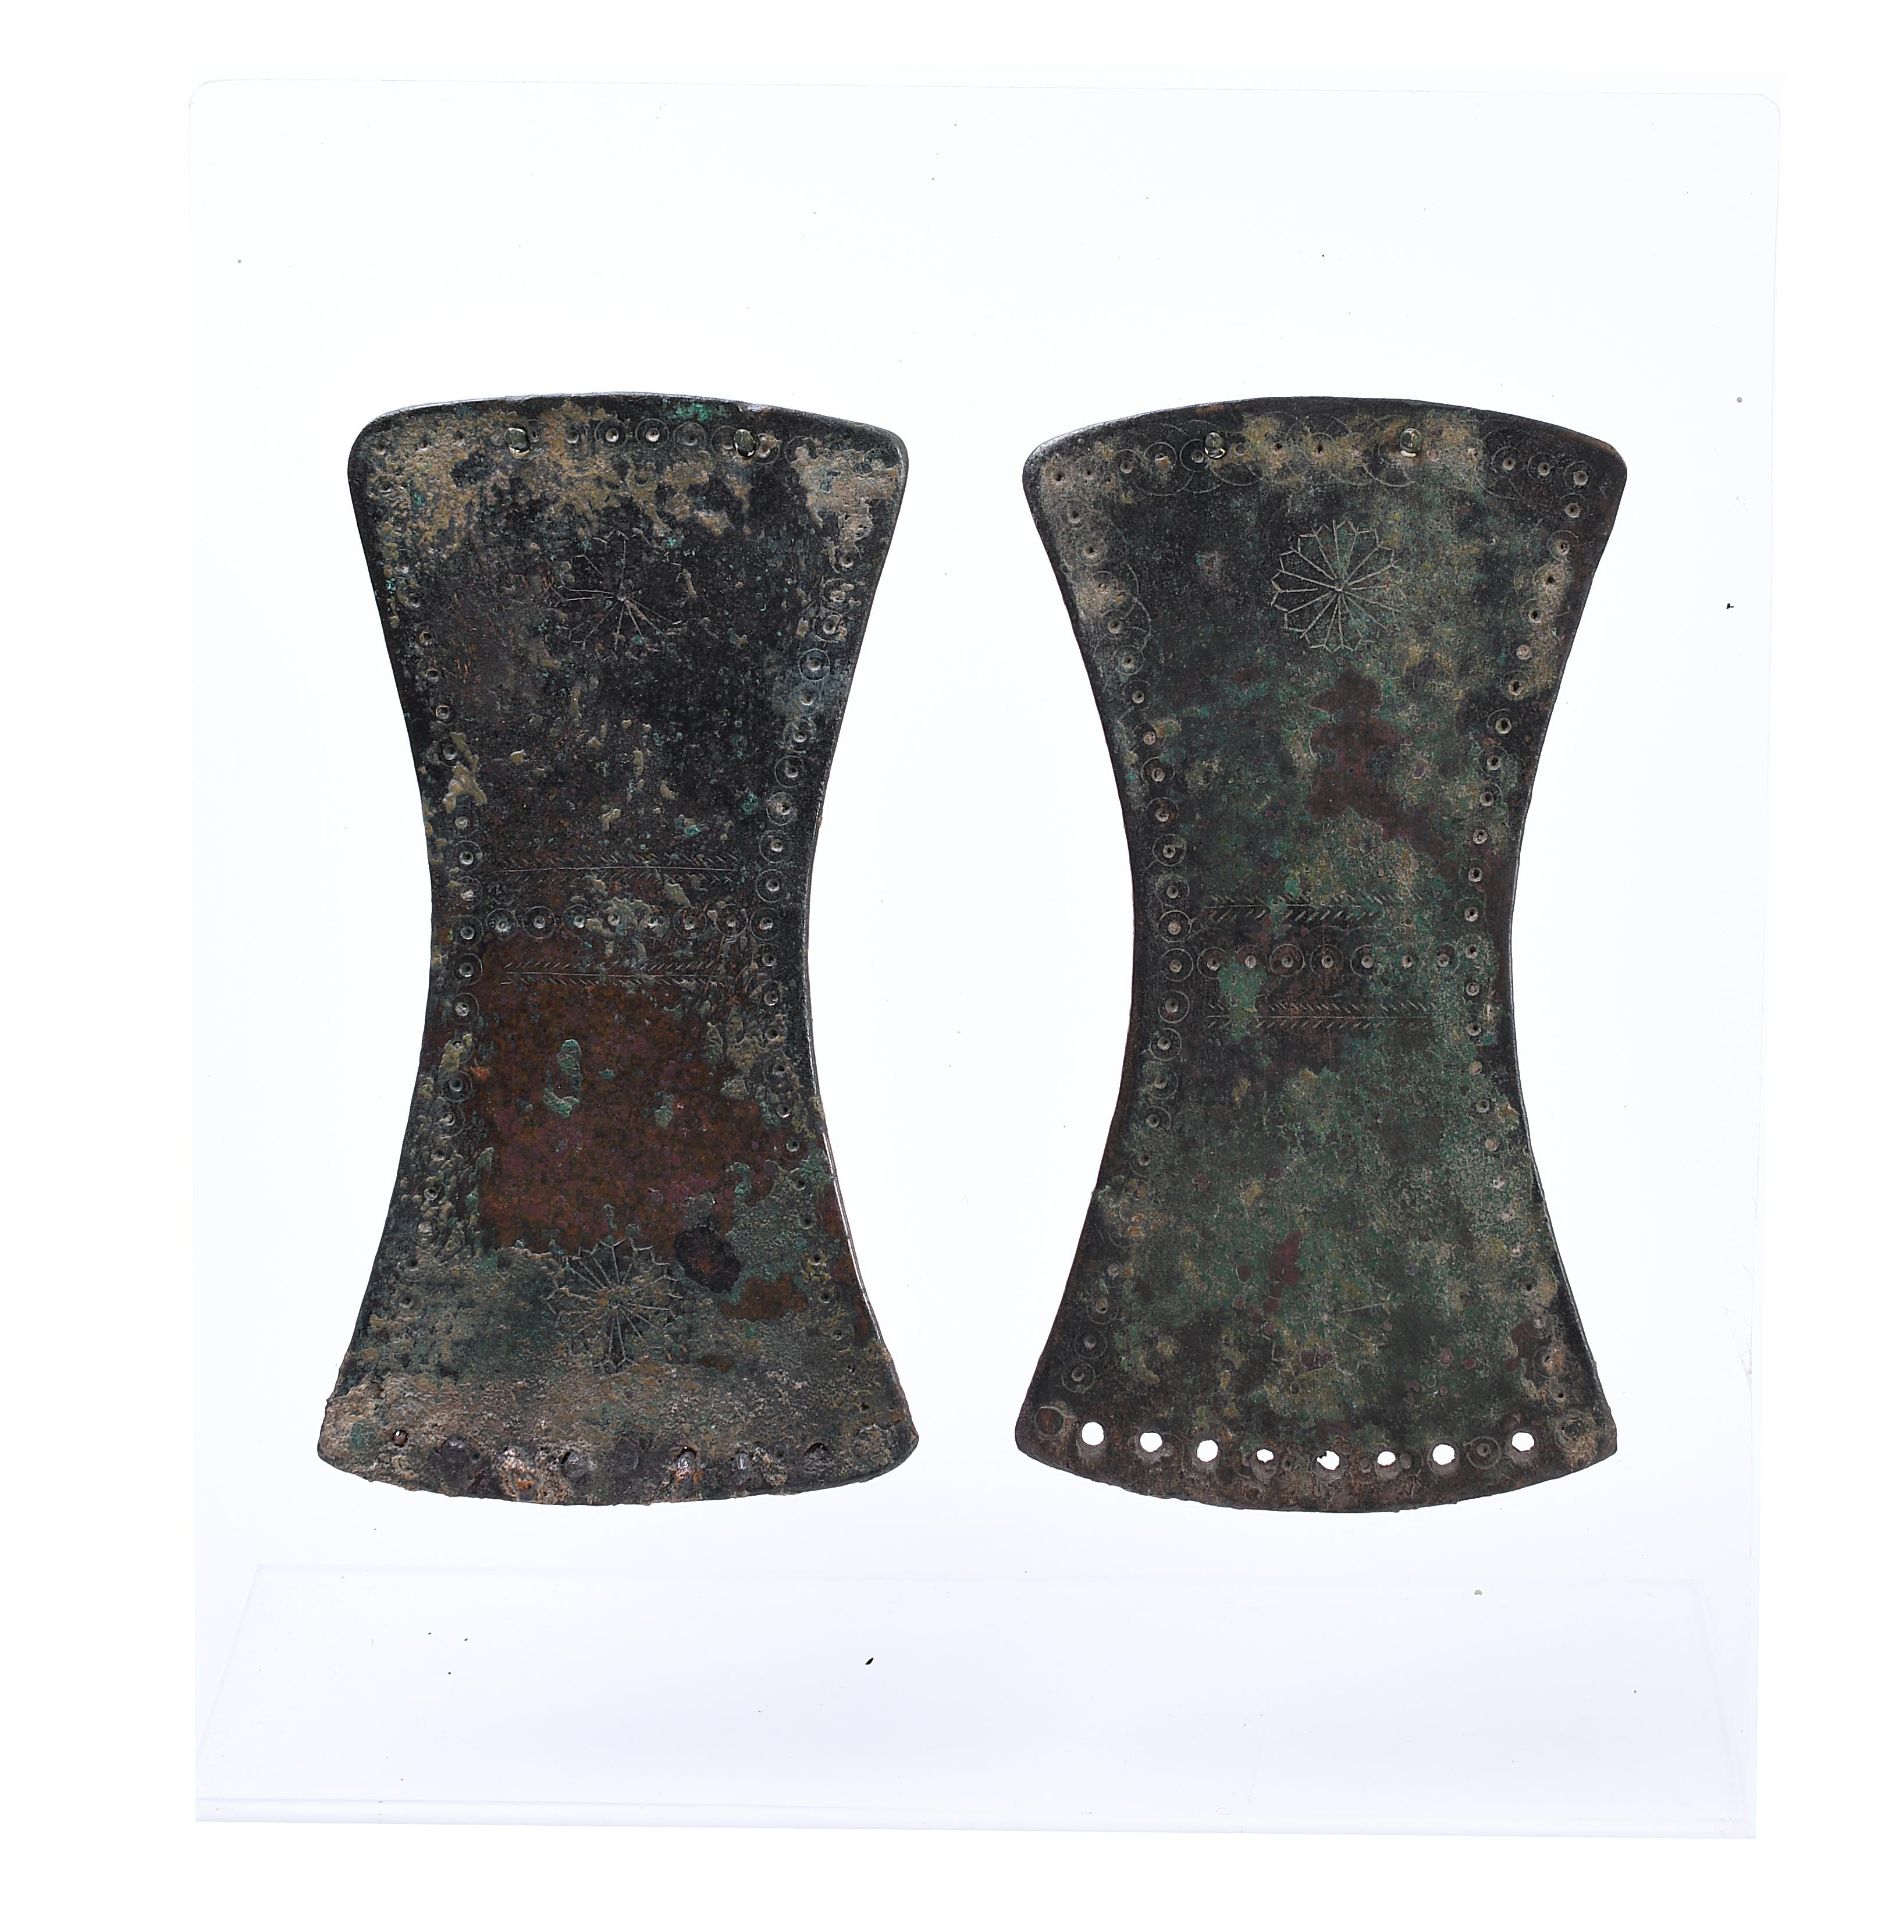 Near Eastern, a pair of bronze wrist guards, ca. 1st Mill BC,